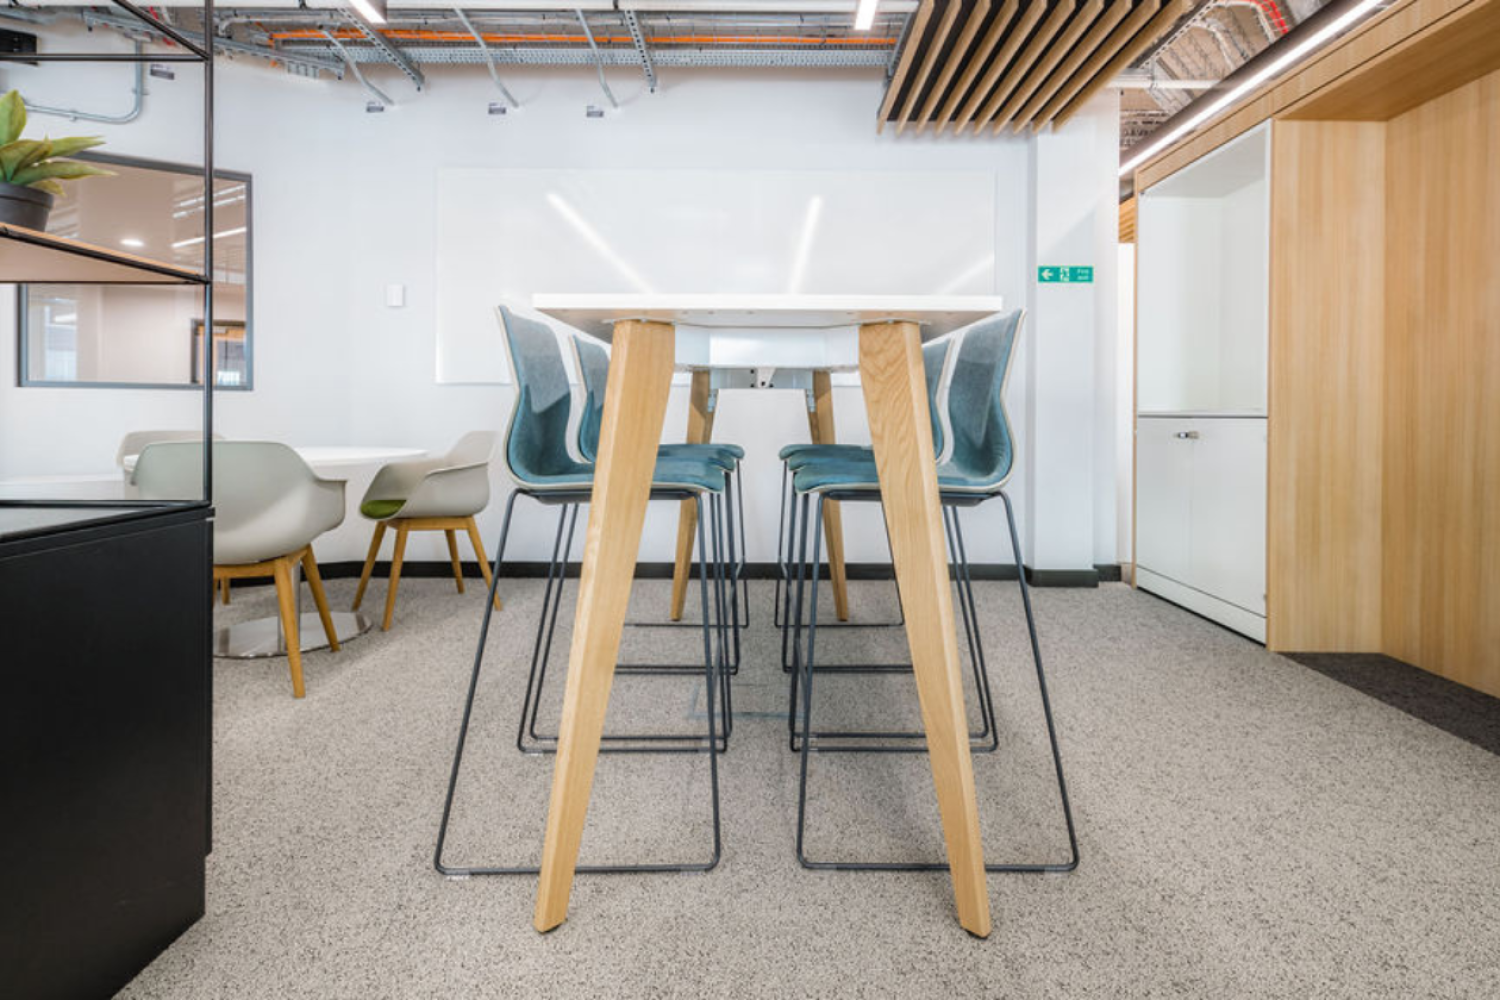 A conference room Ocee and Four Design office furniture including a table and chairs at the University of Sheffield.